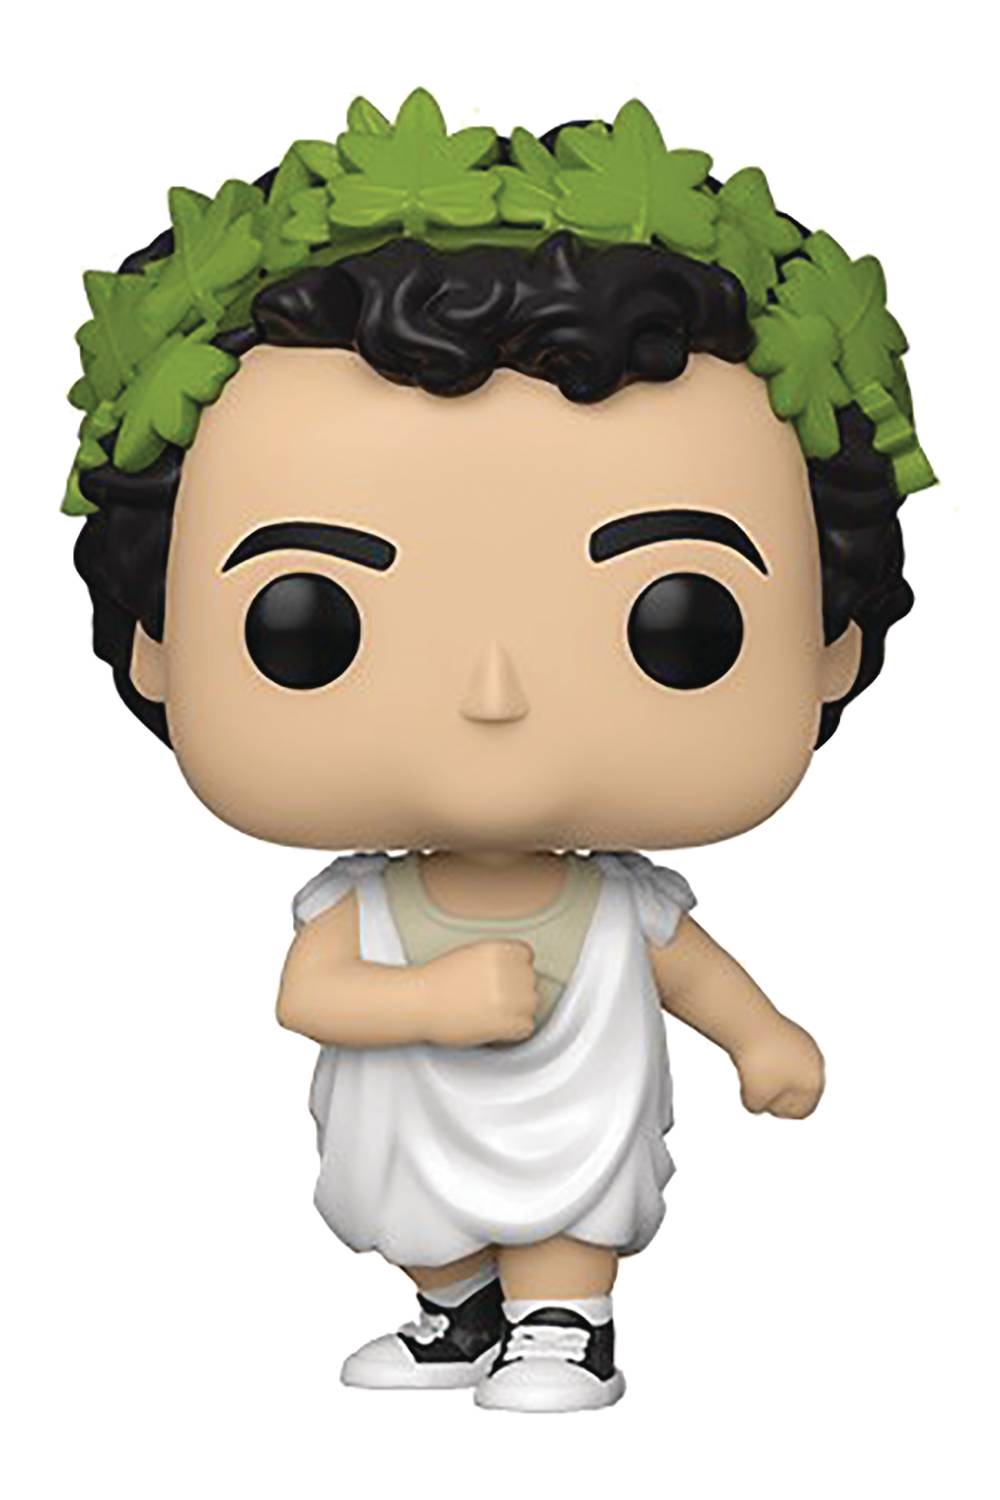 POP MOVIES ANIMAL HOUSE BLUTO IN TOGA VIN FIG